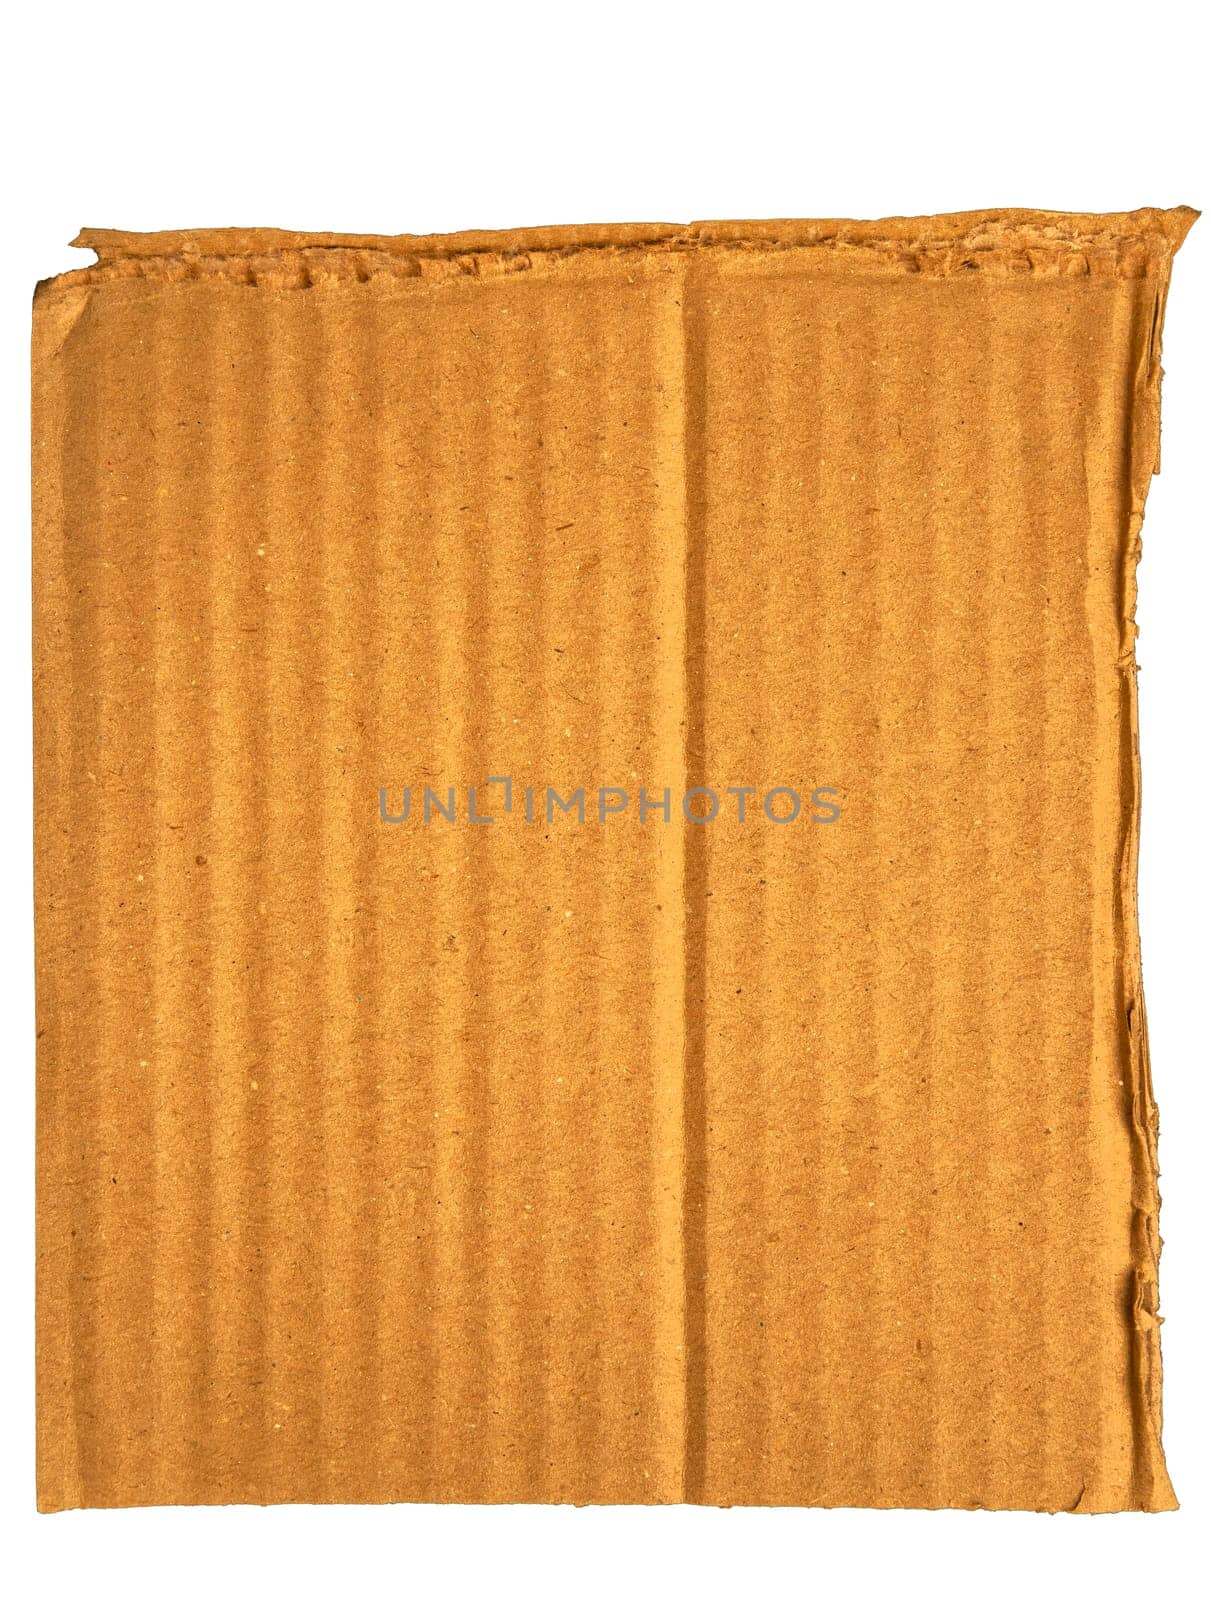 Cardboard Pieces Textured Background. Carton Piece, Ripped Kraft Paper Wallpaper, Brown Wrapping Vintage Paper Isolated Top View by EdVal